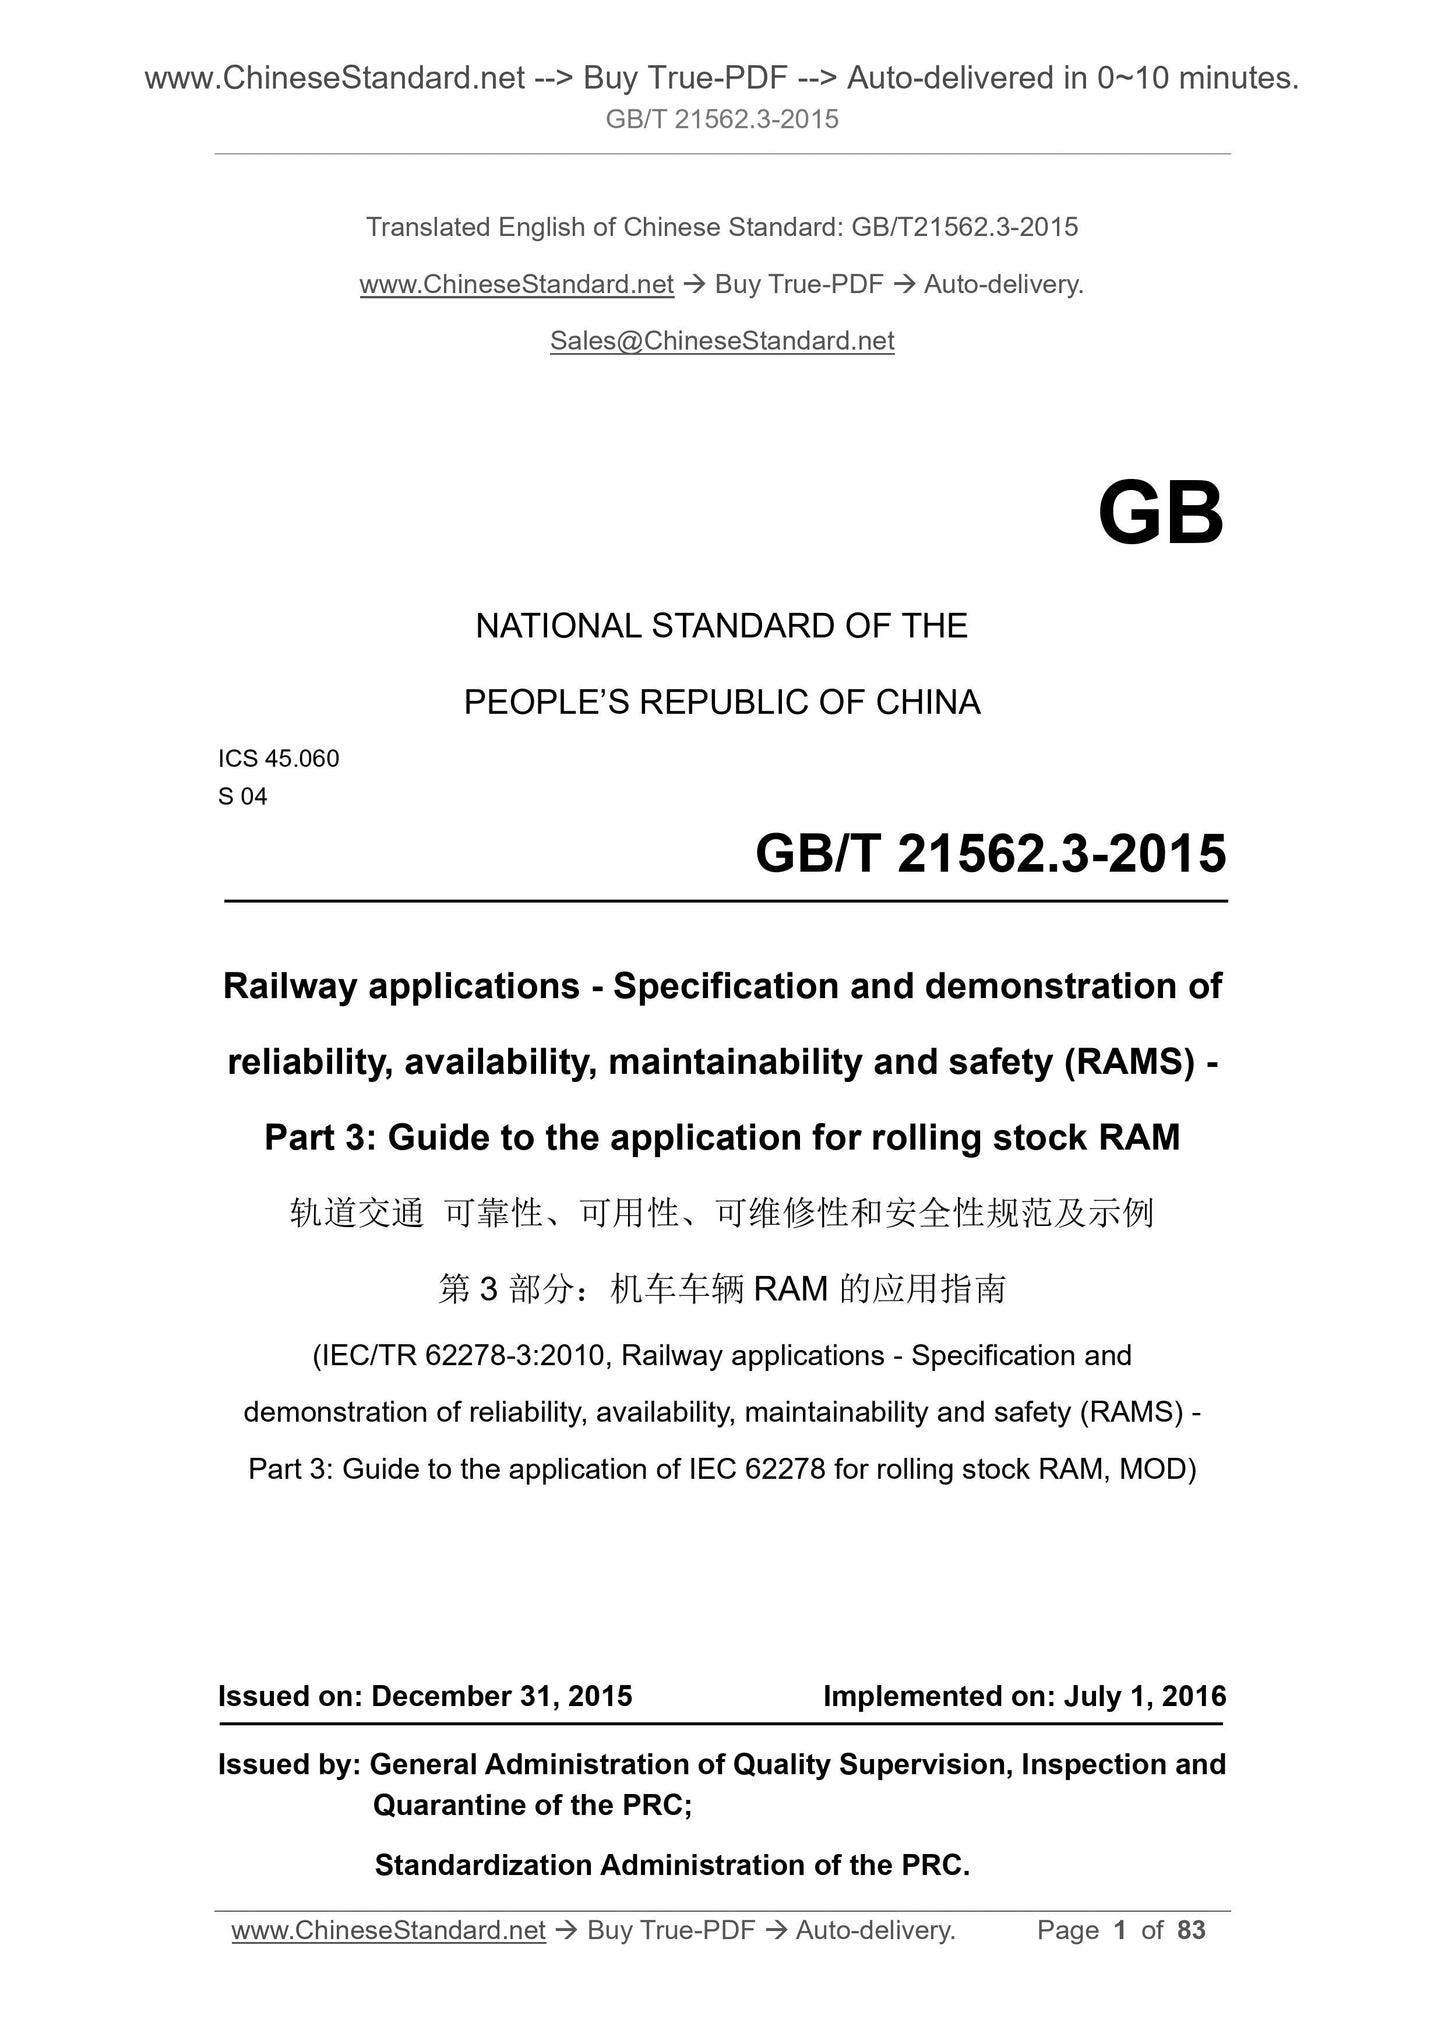 GB/T 21562.3-2015 Page 1